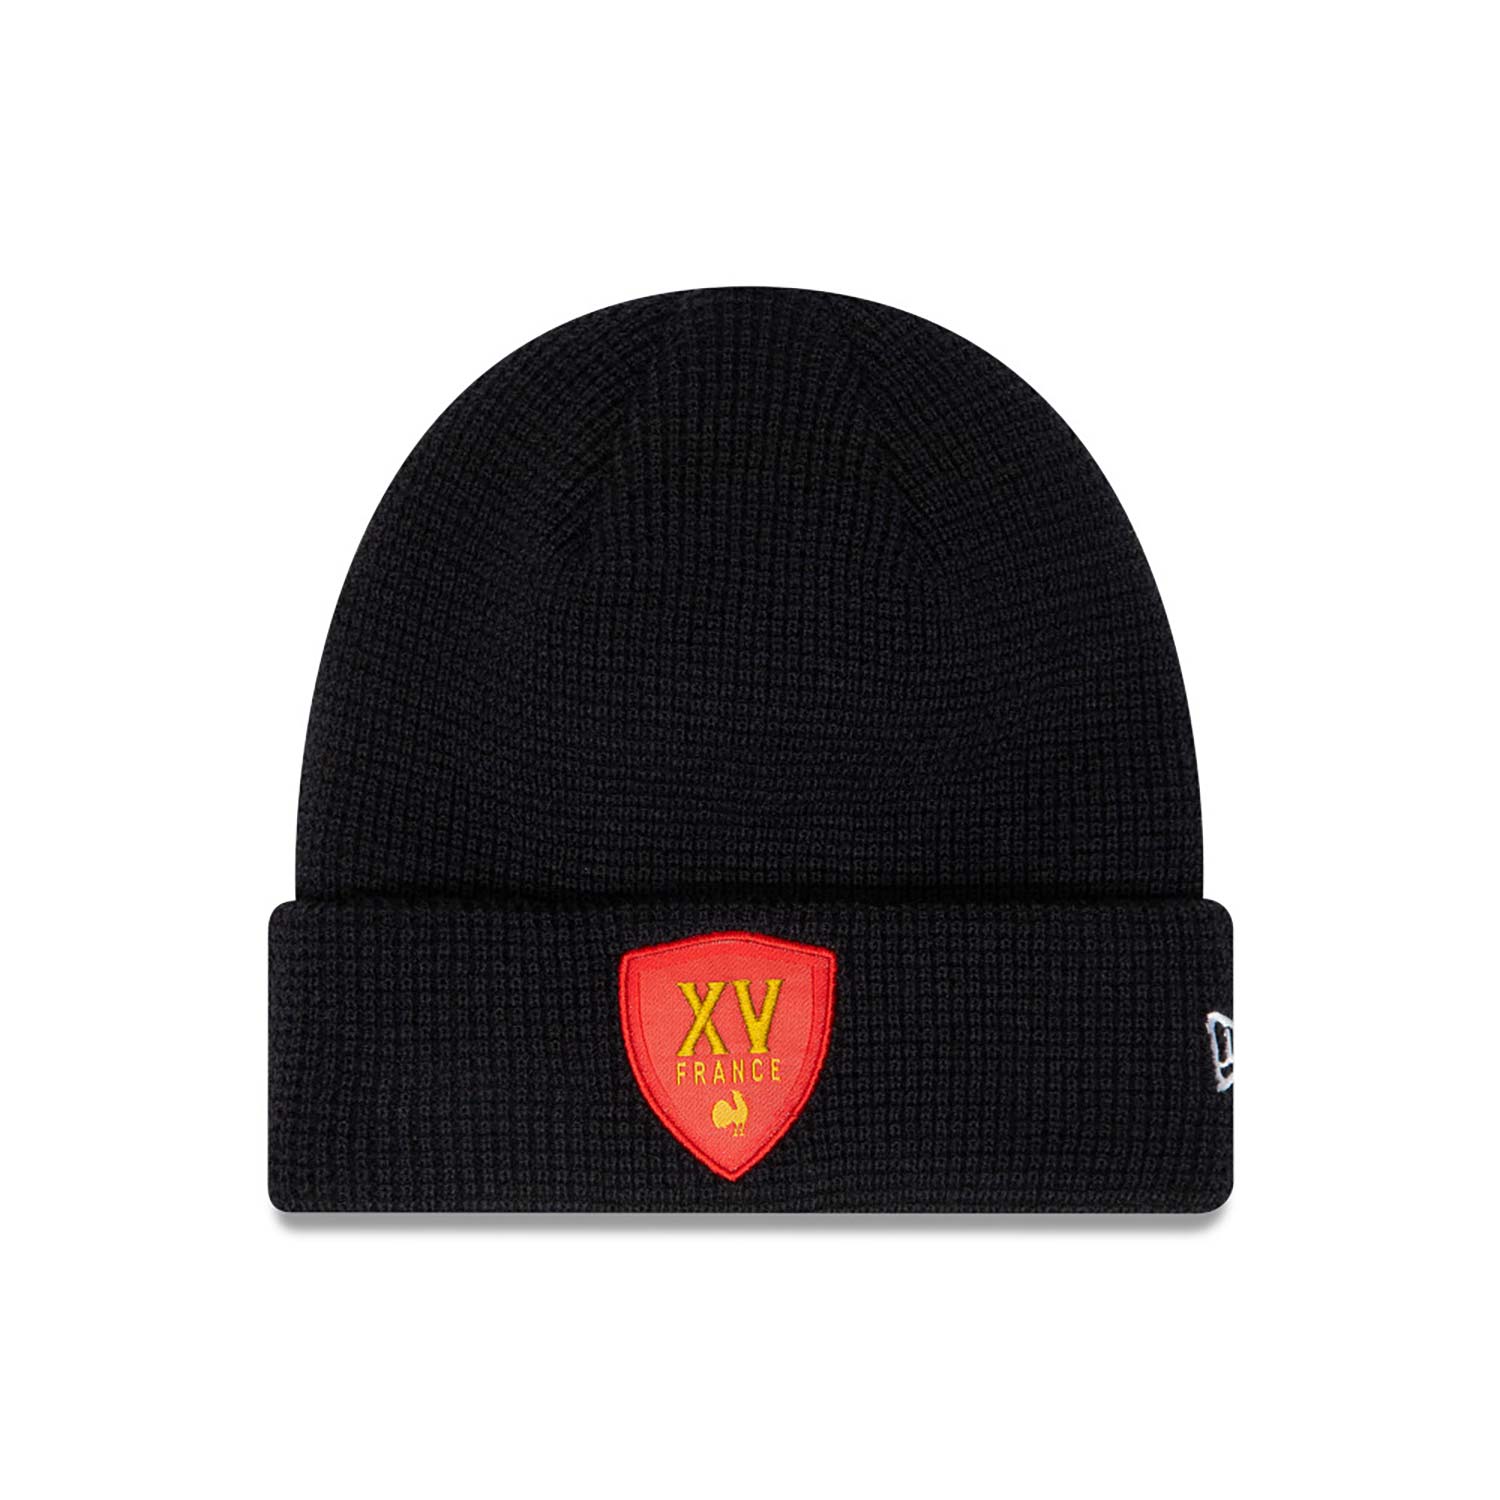 Bonnet French Rugby